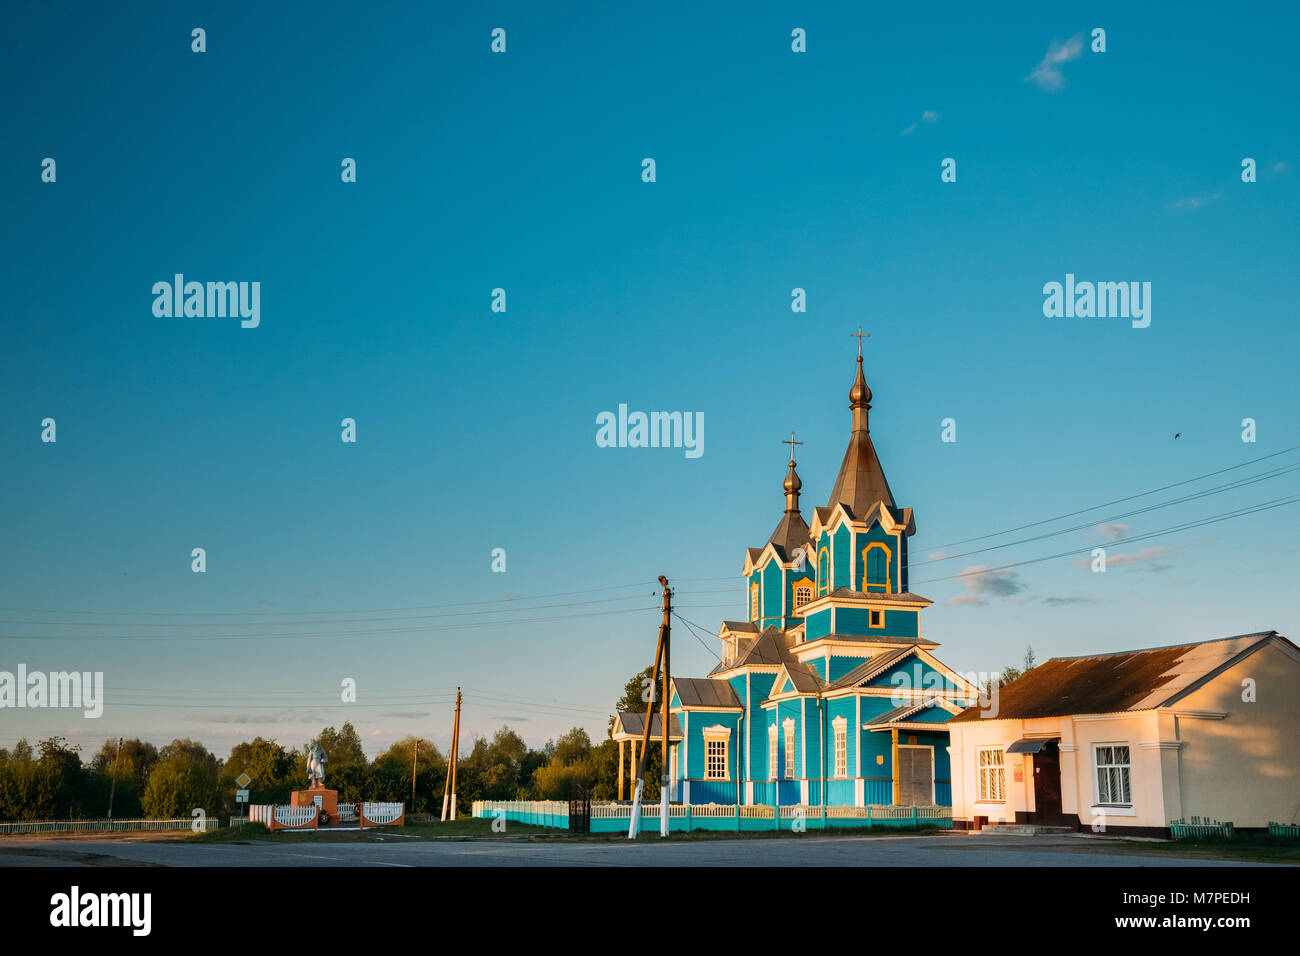 Krasnyy Partizan, Dobrush District, Gomel Region, Belarus. Old Wooden Orthodox Church of the Nativity of the Virgin Mary At Sunset In Village Stock Photo